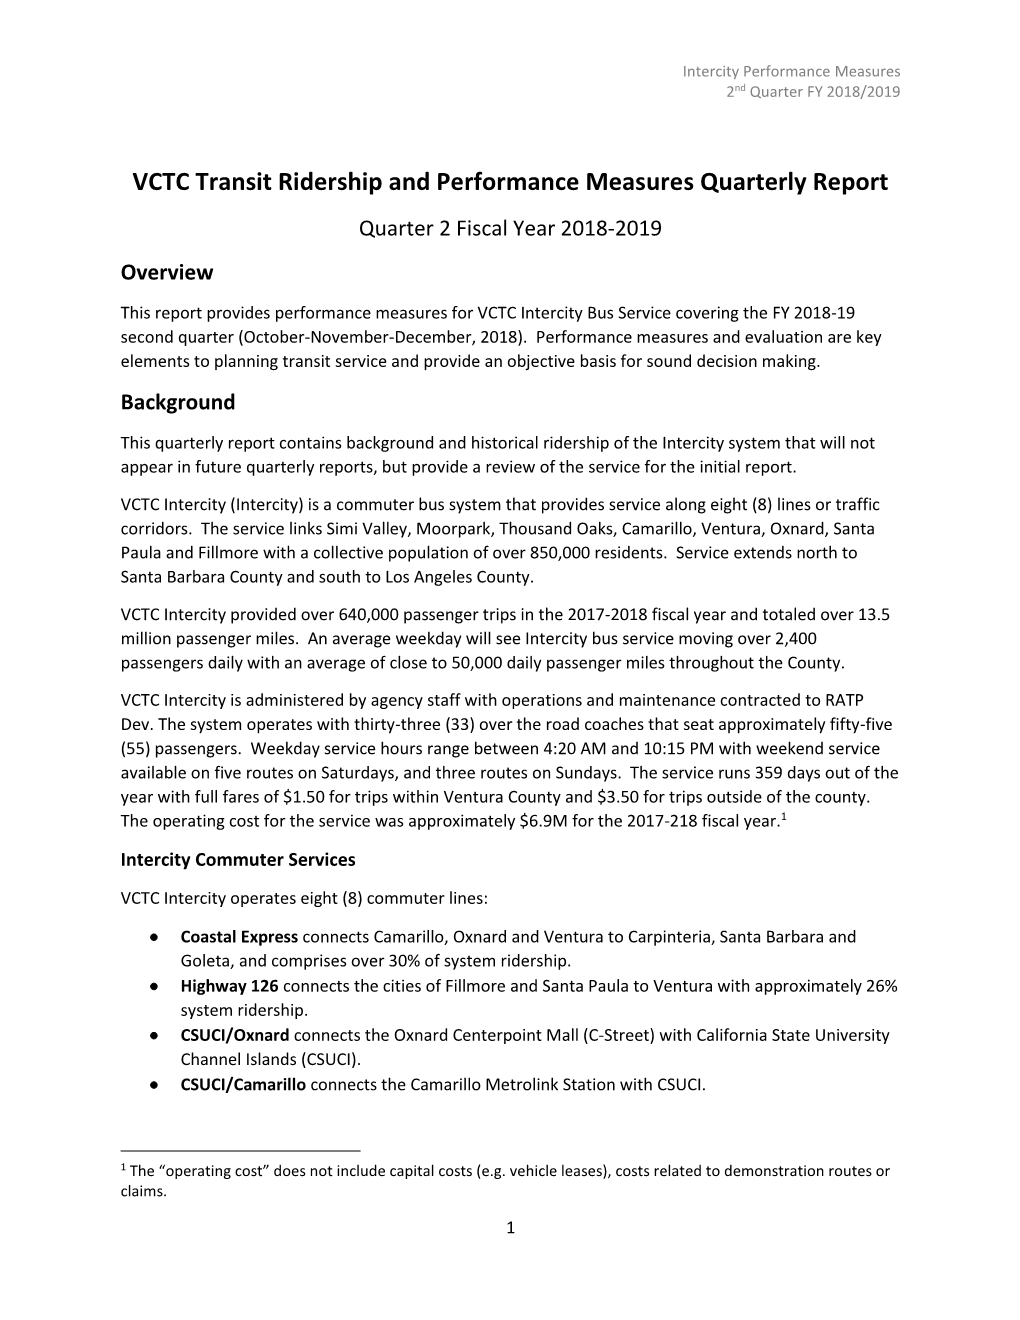 VCTC Transit Ridership and Performance Measures Quarterly Report Quarter 2 Fiscal Year 2018-2019 Overview